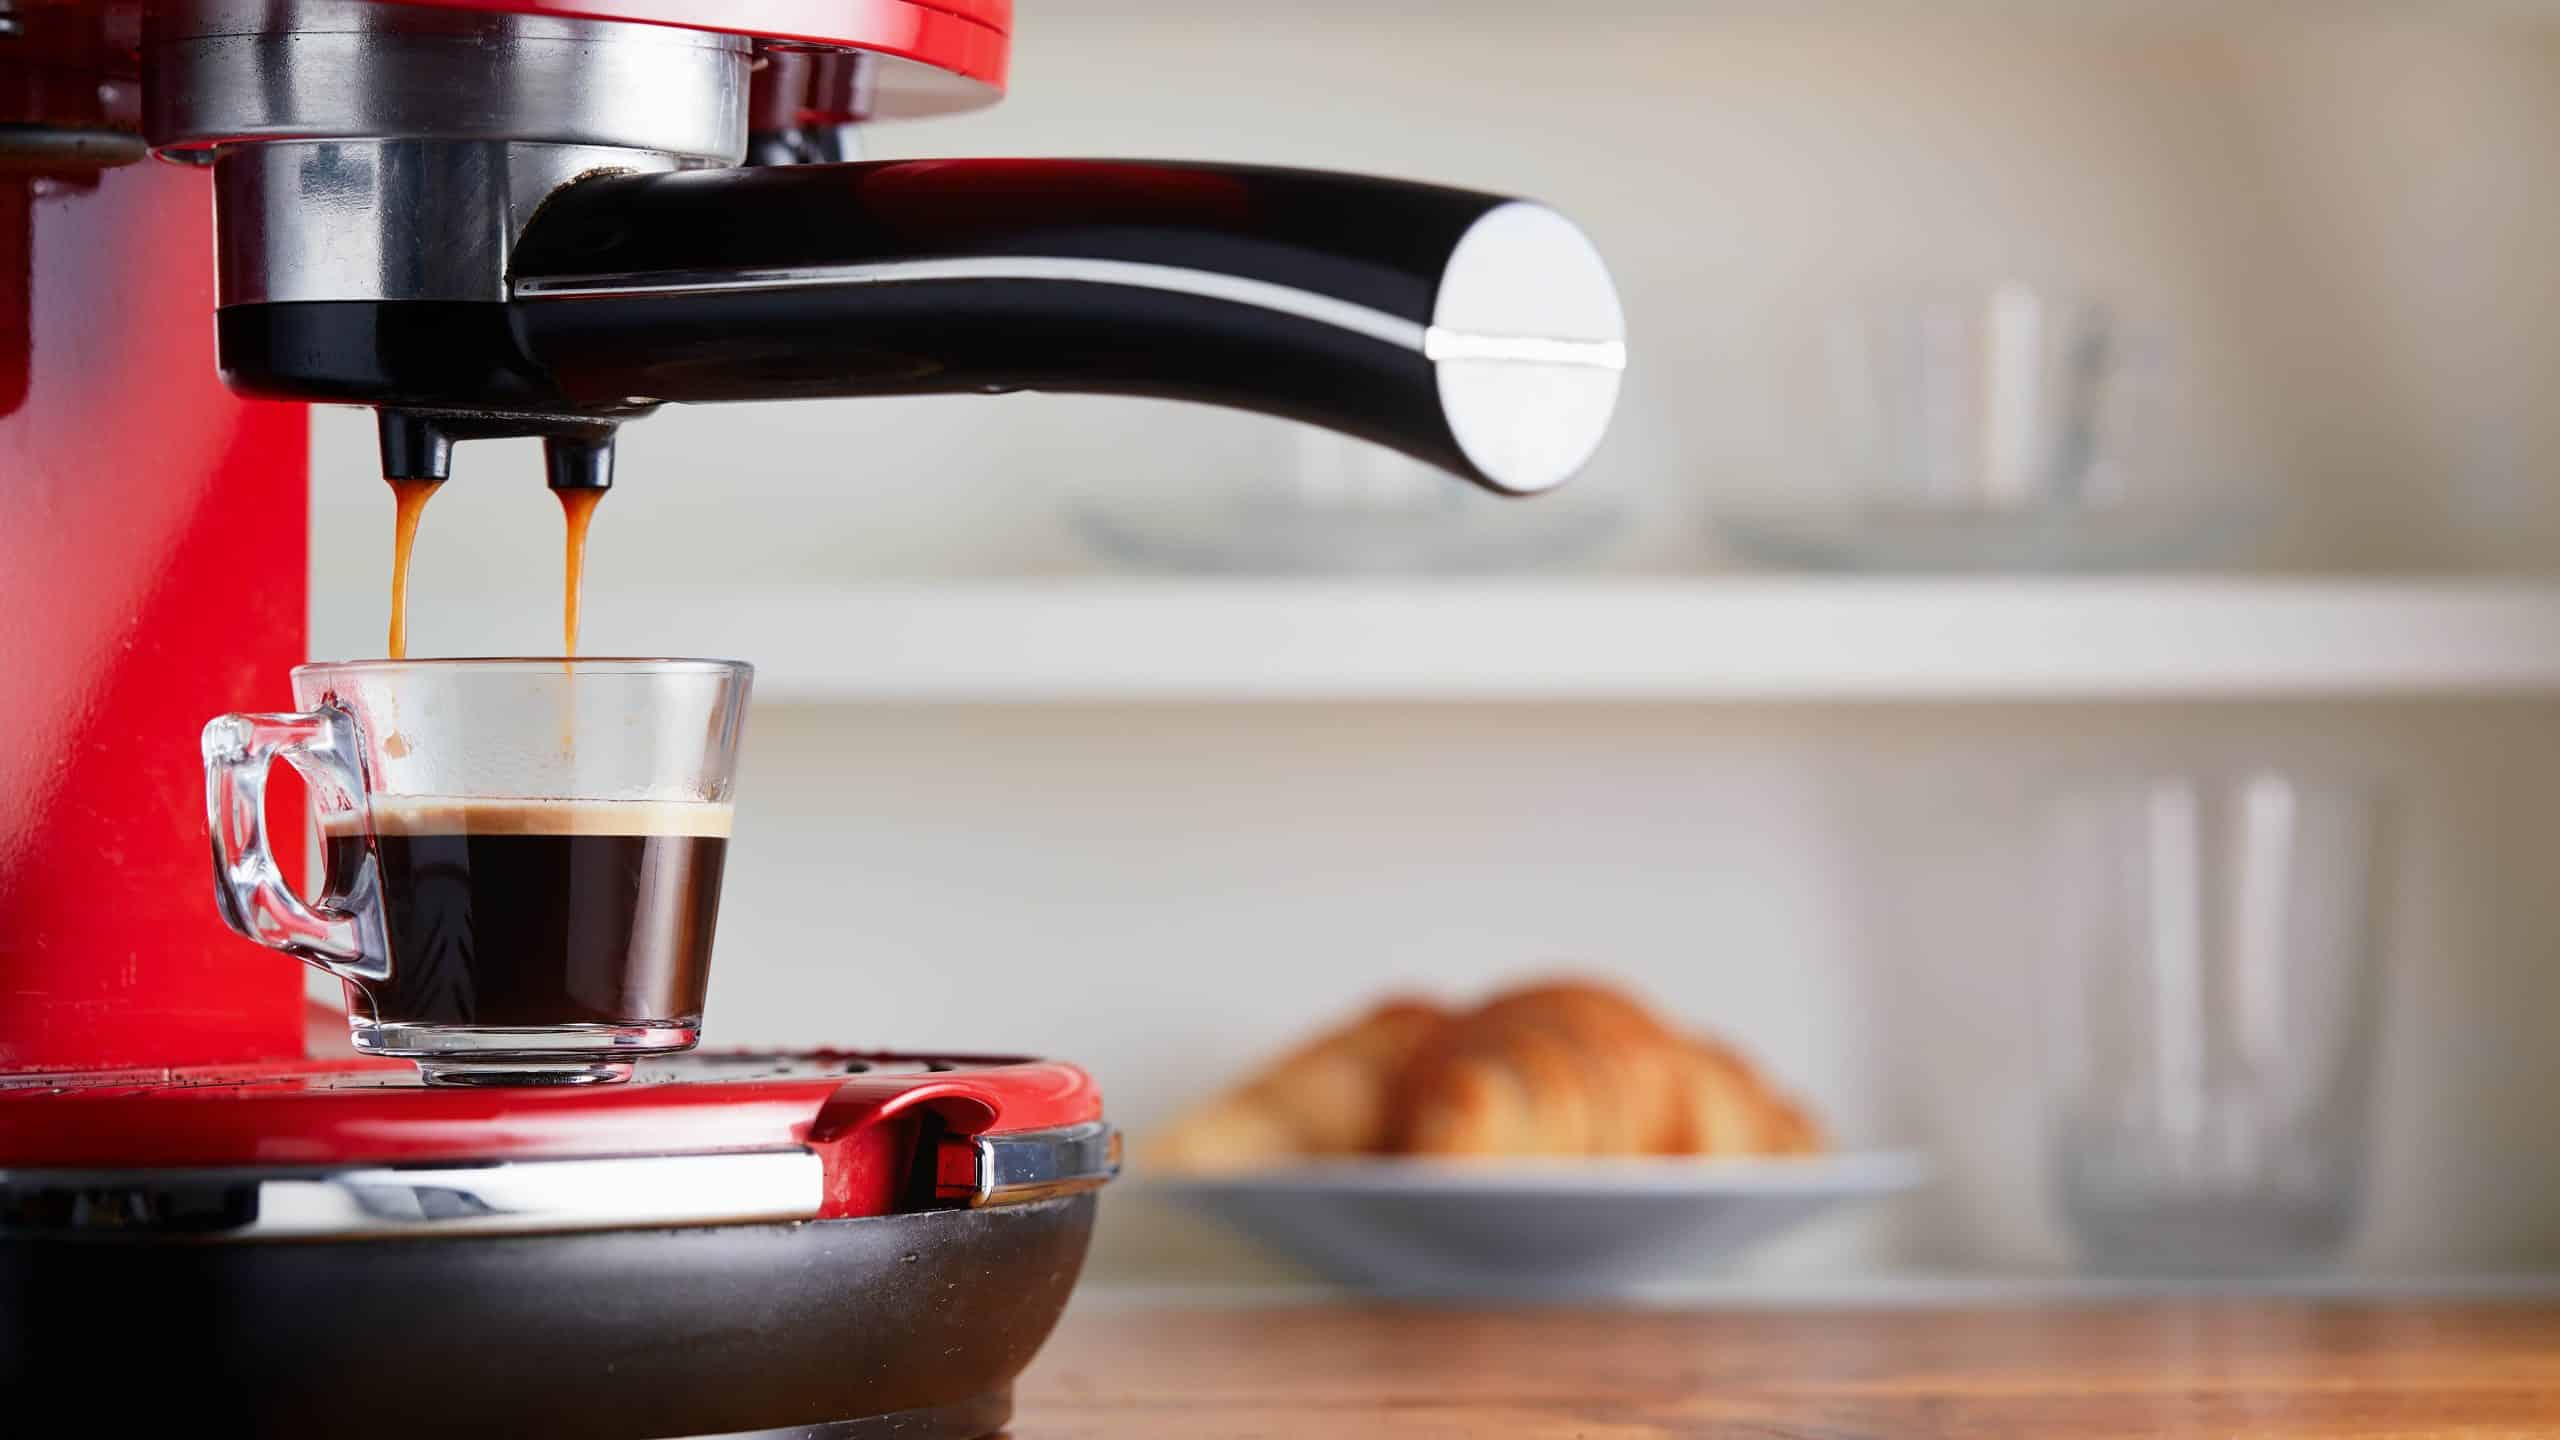 What Should You Look For When Buying A Coffee Maker?